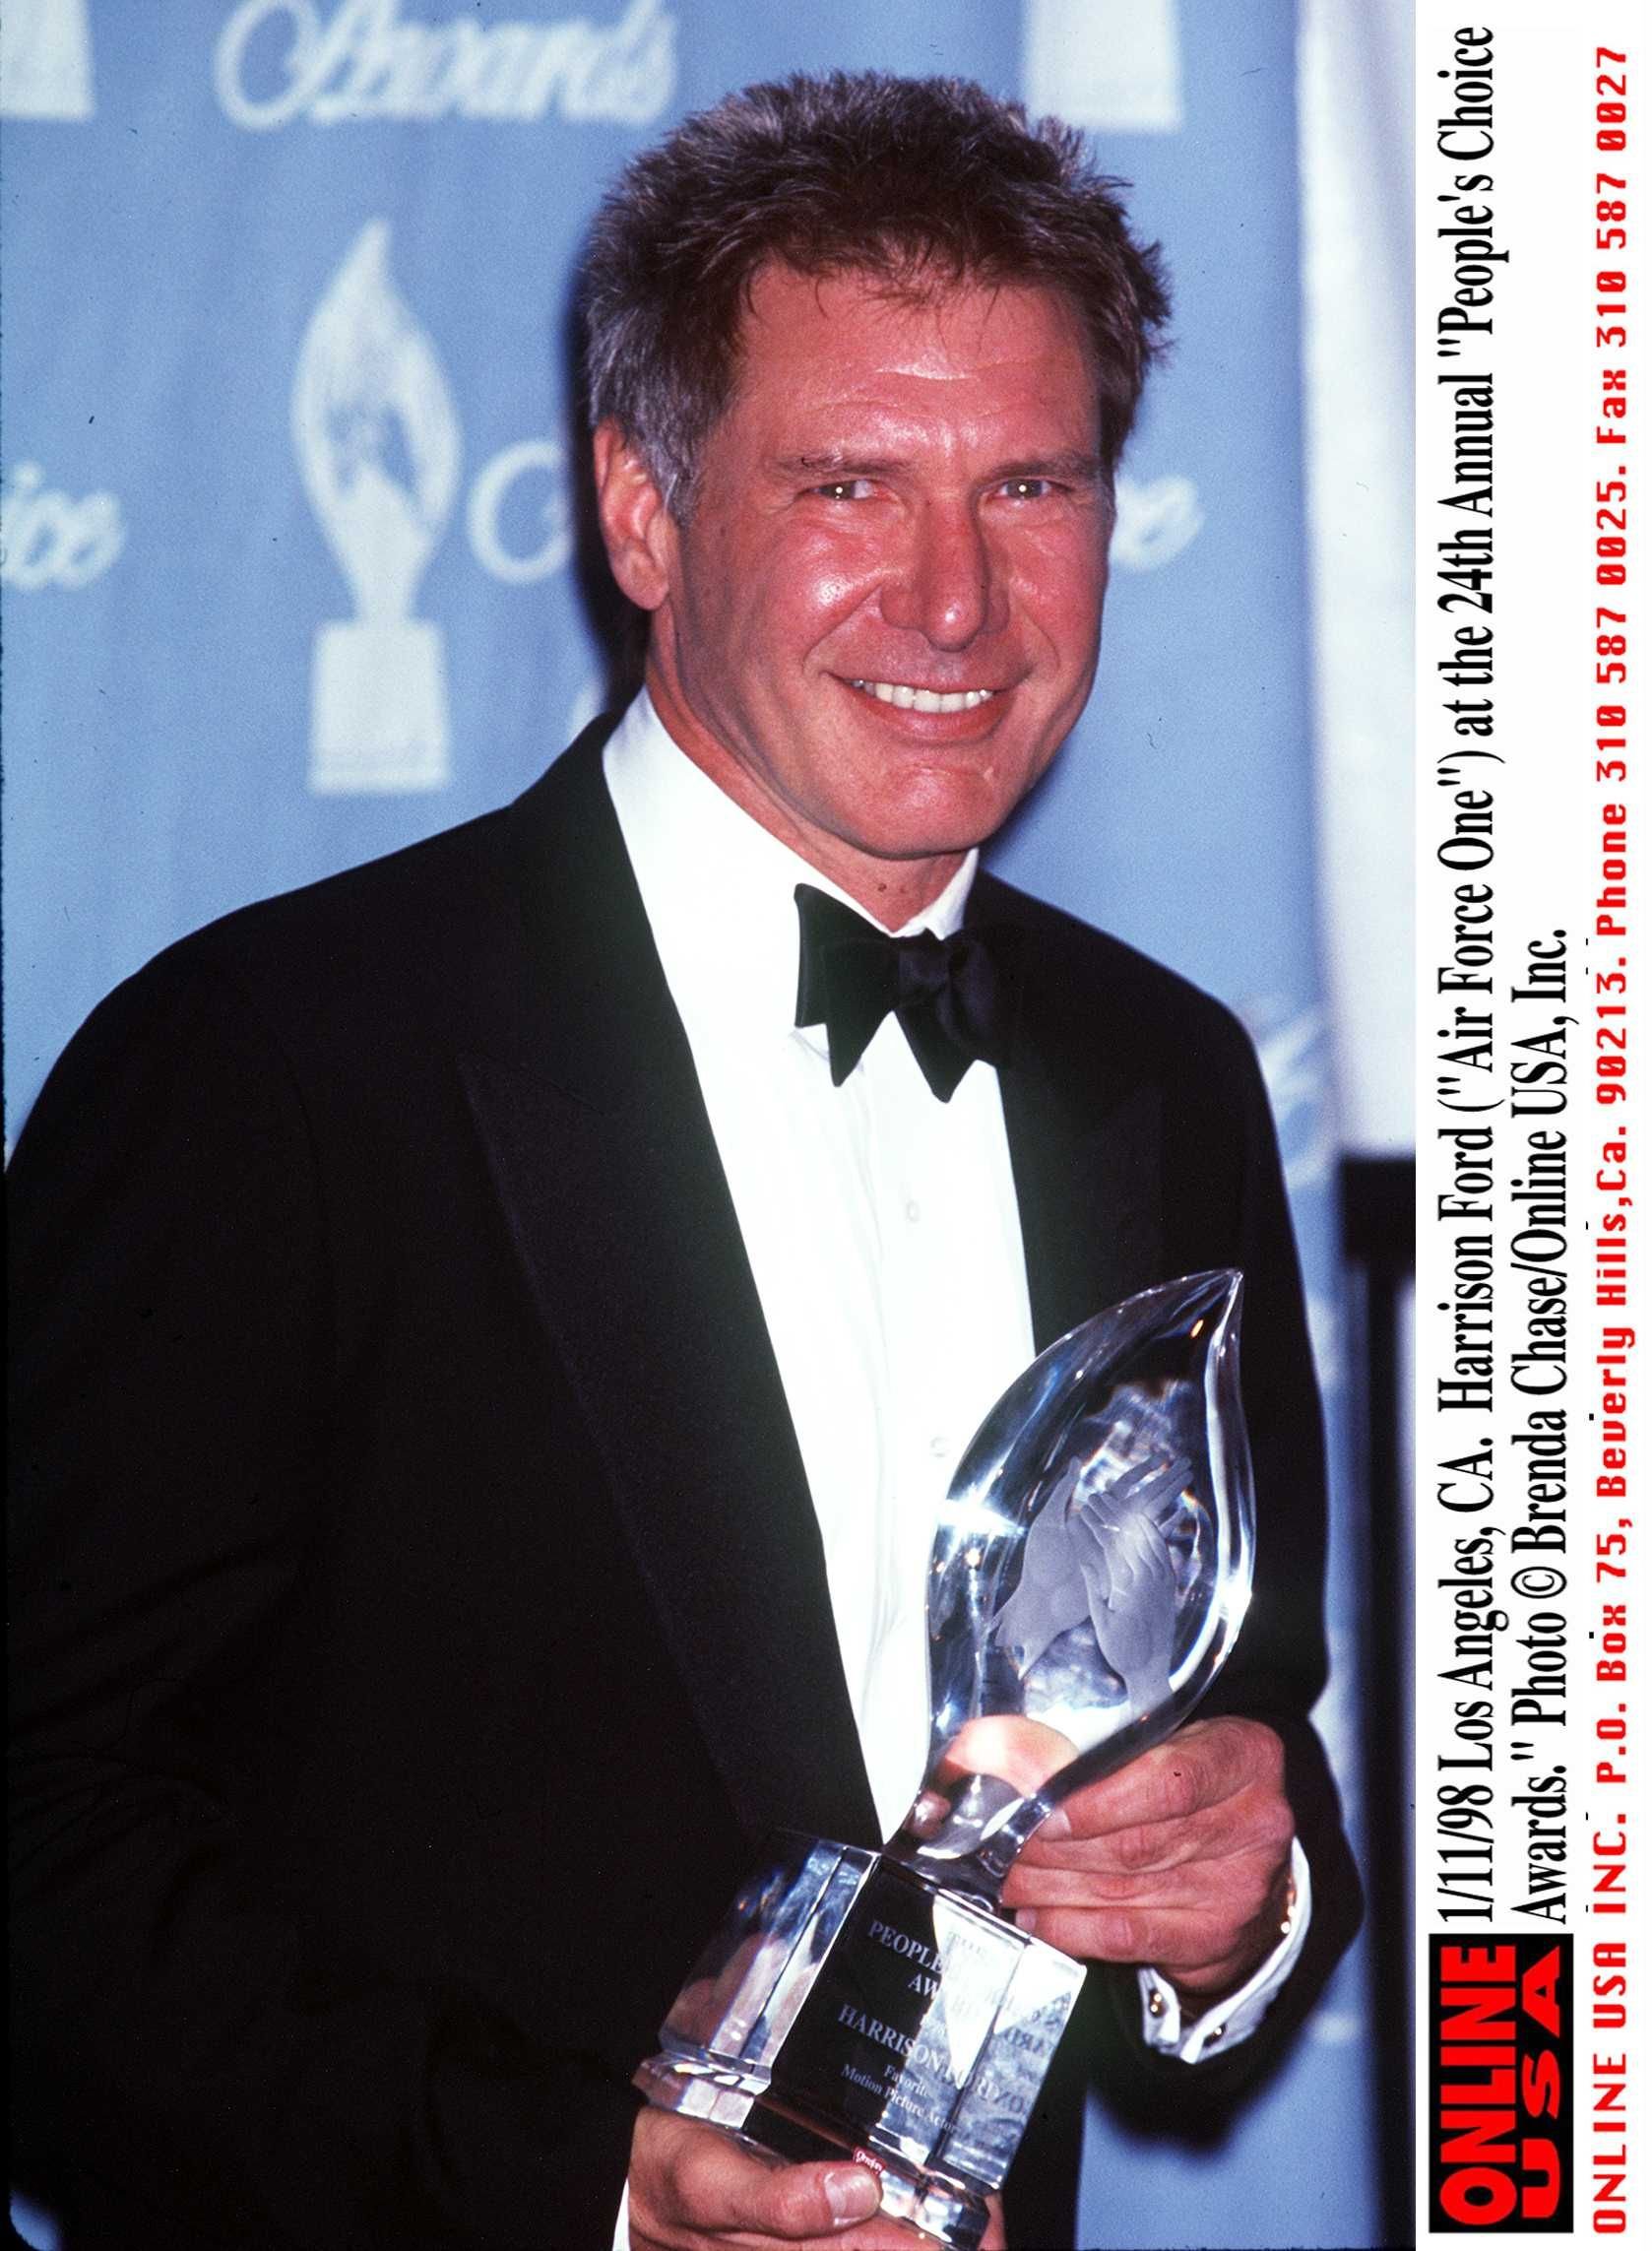 Harrison Ford at the 24th Annual People's Choice Awards on January 11, 1998, in Los Angeles, California. | Source: Brenda Chase/Online USA, Inc/Getty Images